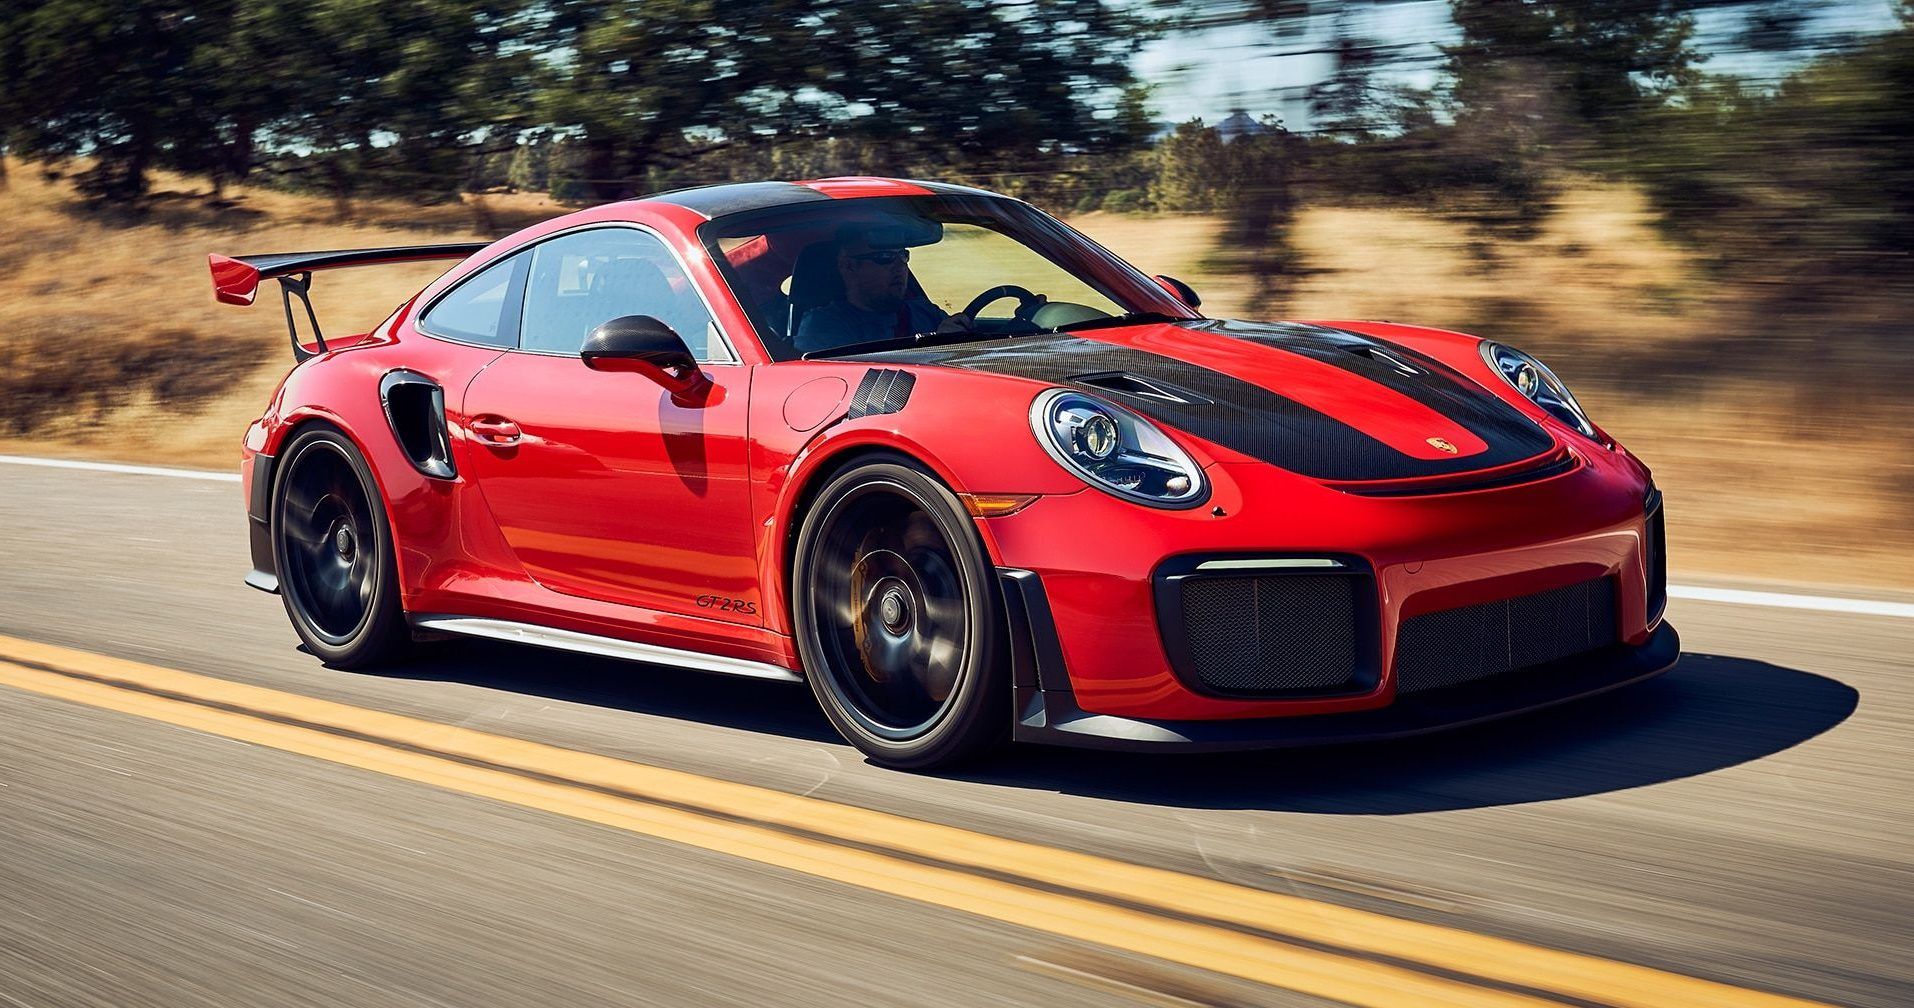 Ranking The 10 Fastest Porsches Ever Made | HotCars